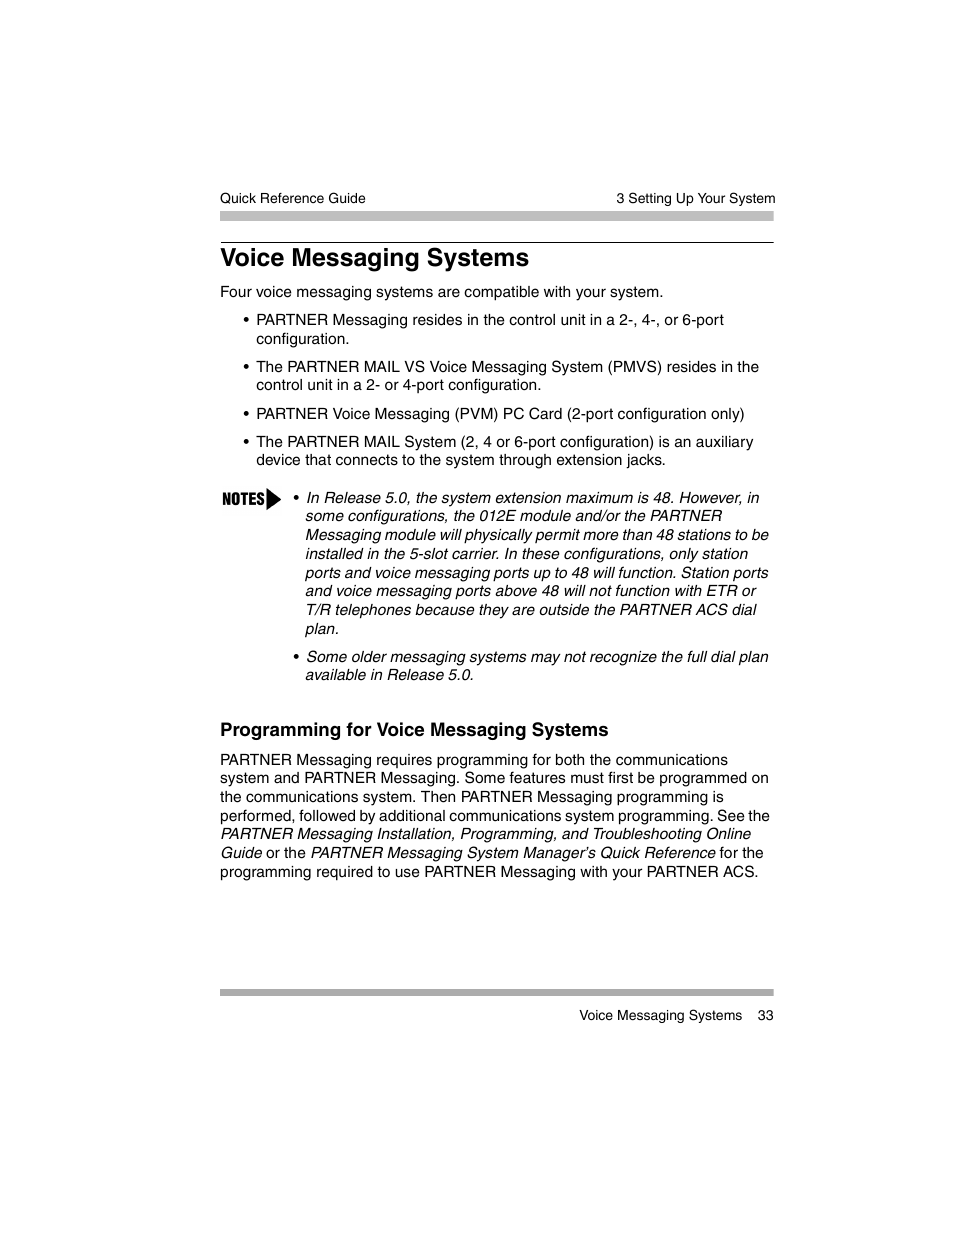 Voice messaging systems, Programming for voice messaging systems